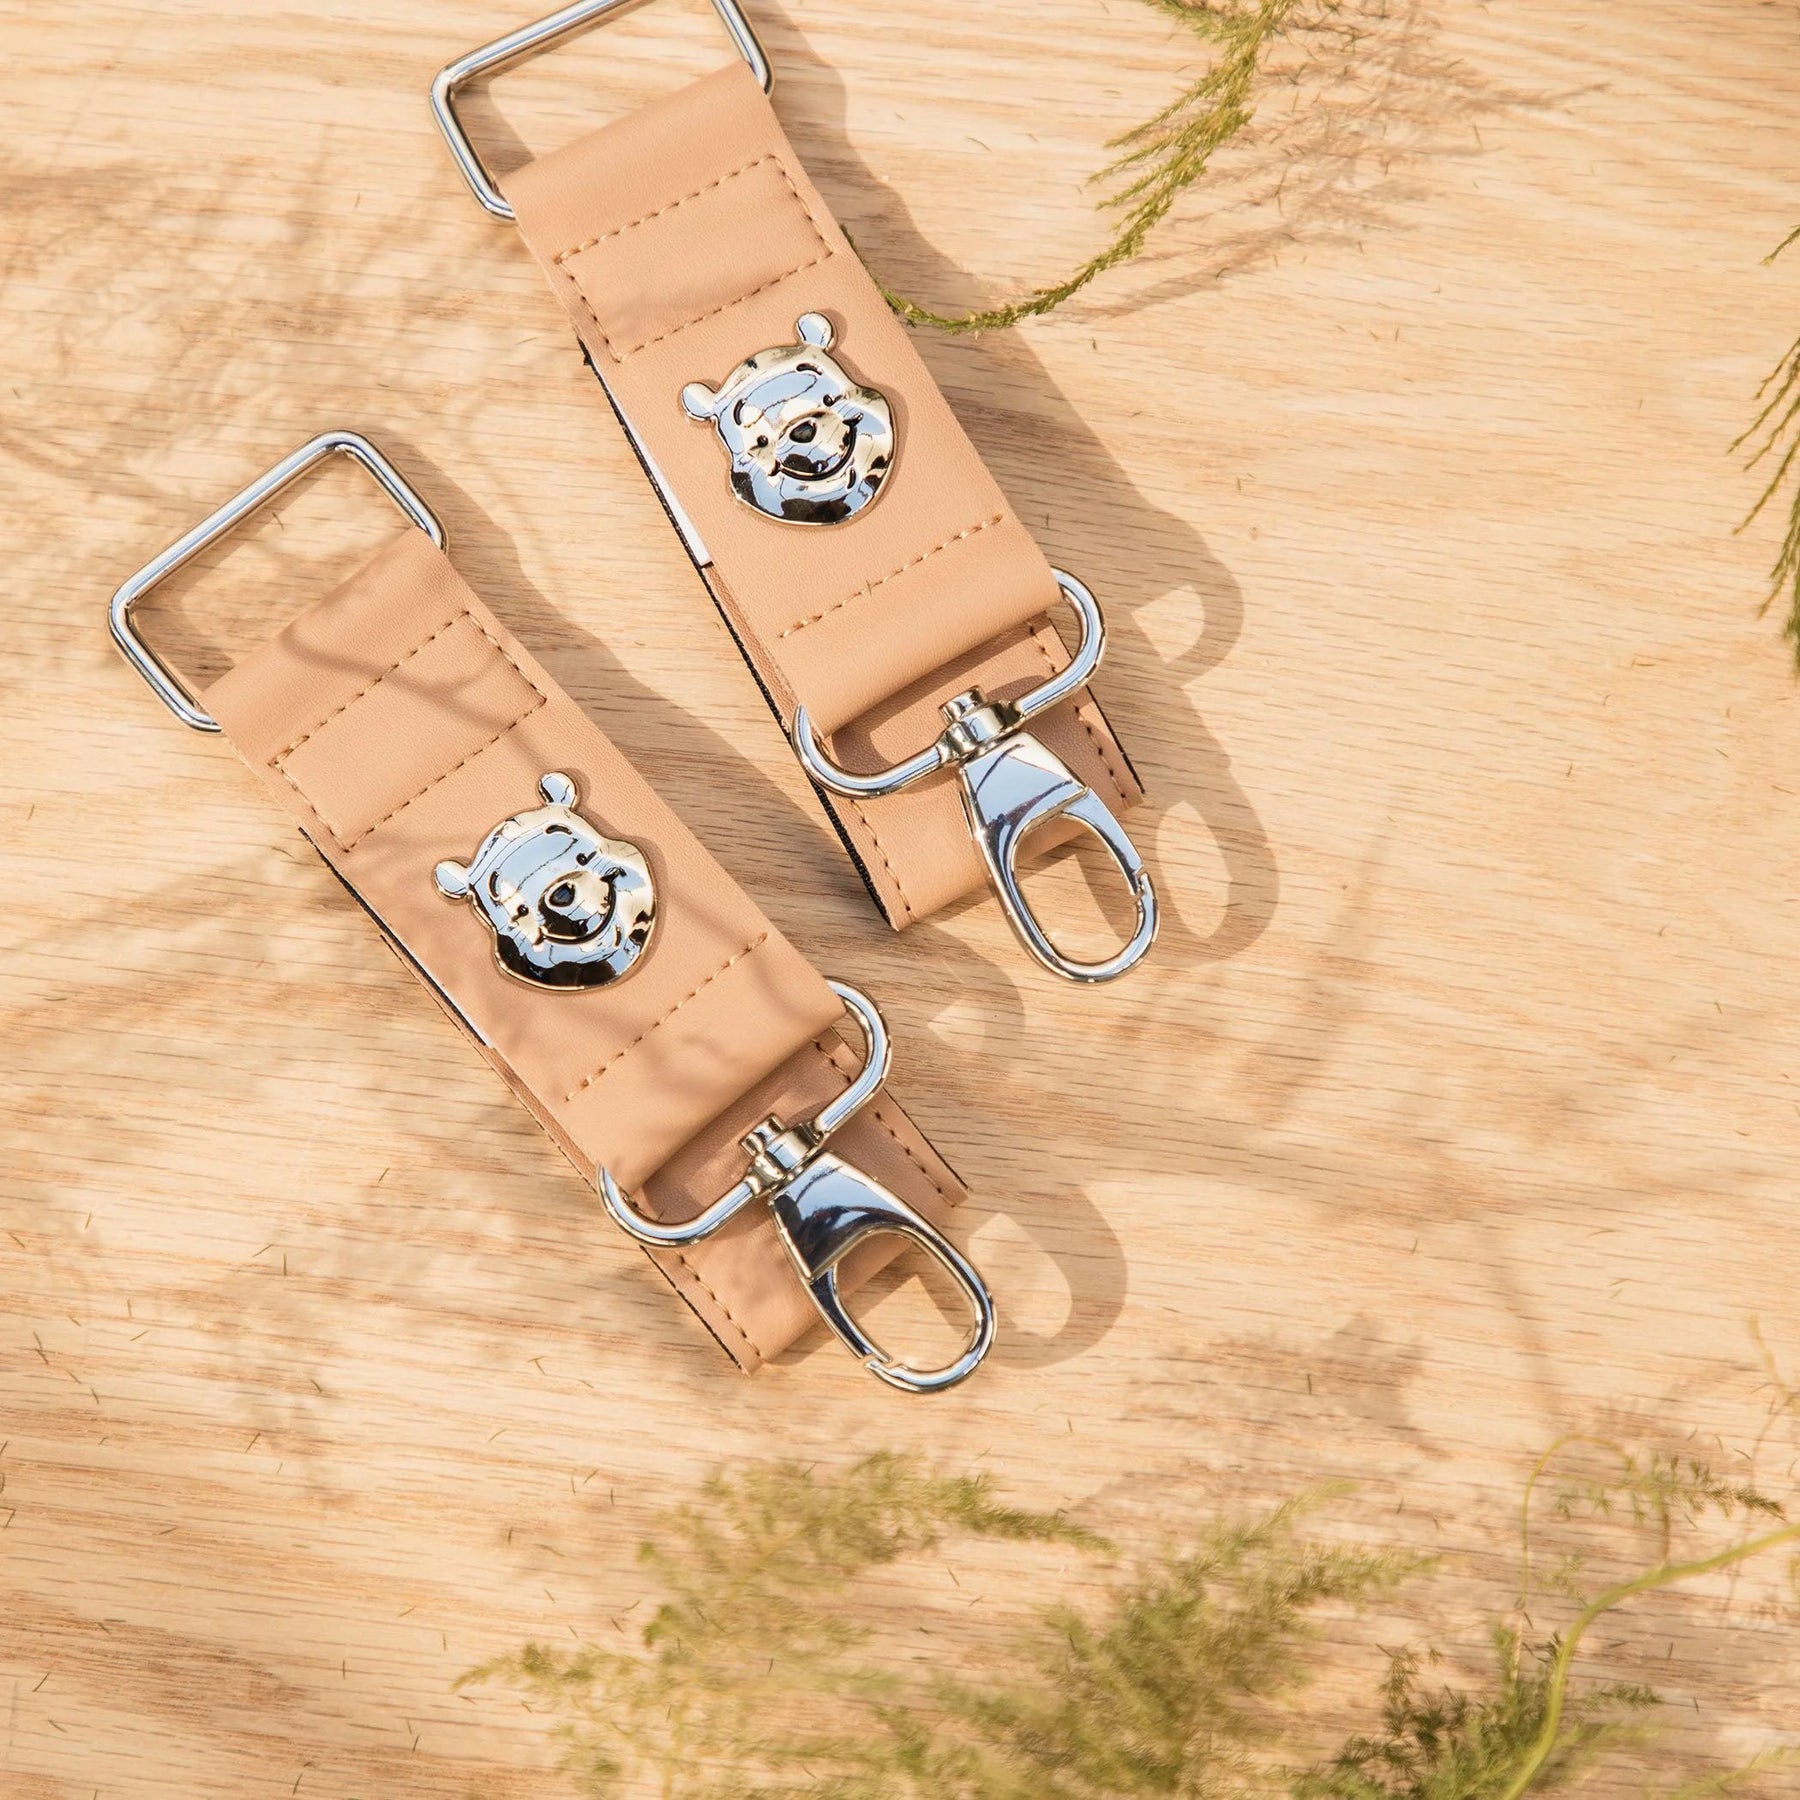 valet stroller clips in winnie the pooh